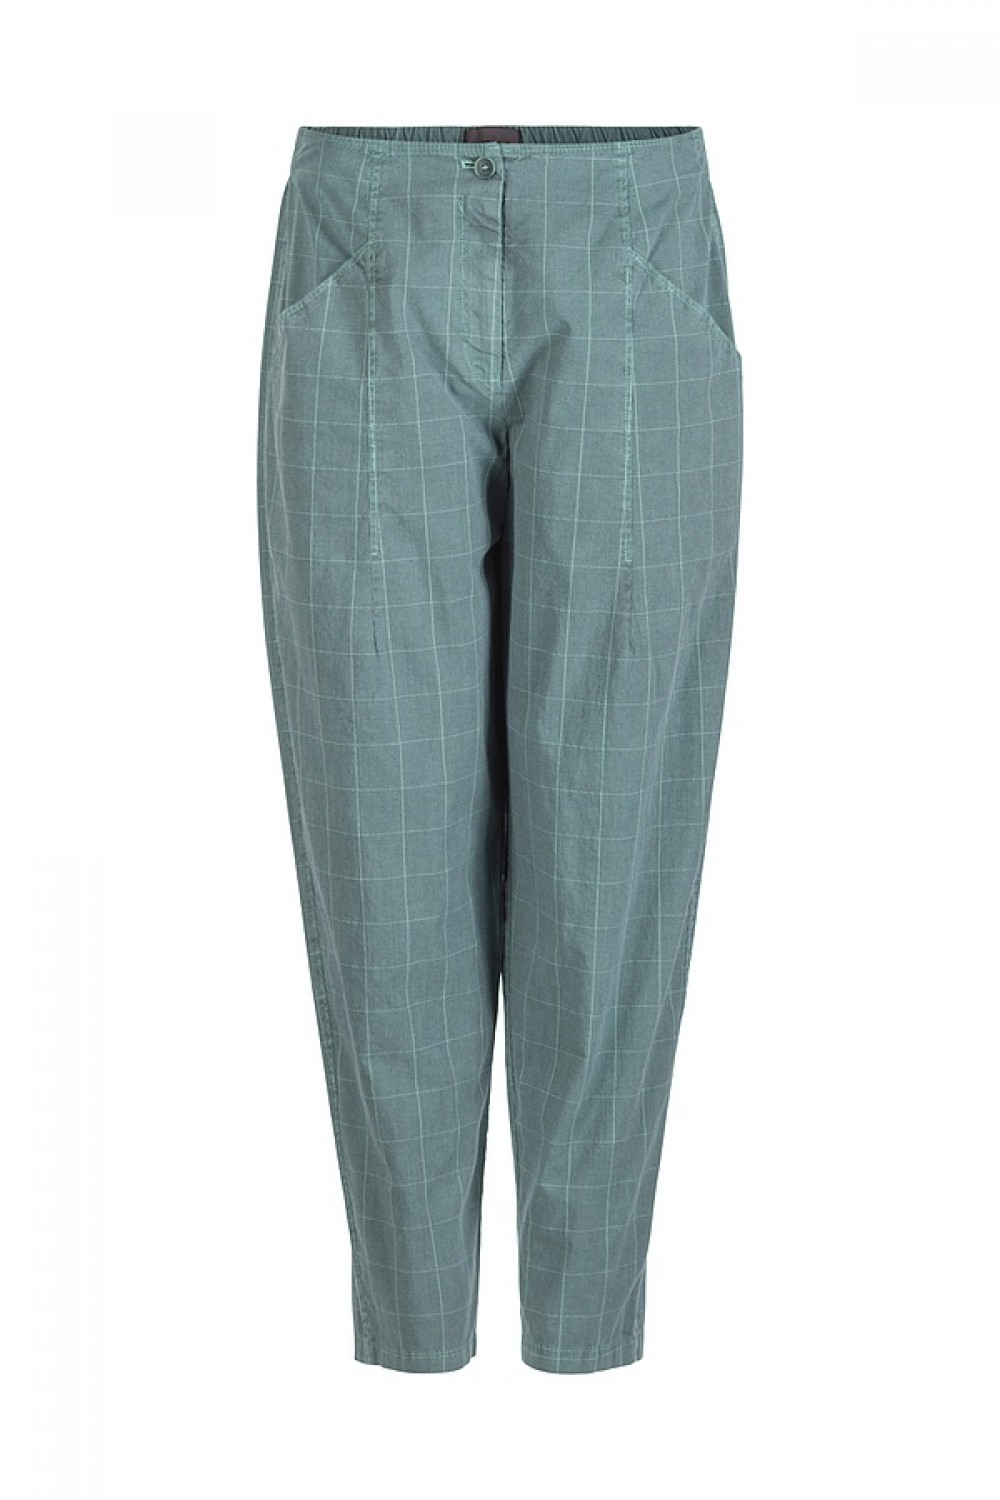 OSKA Trousers 418 Cascade / Cotton Stretch with Windowpane Check